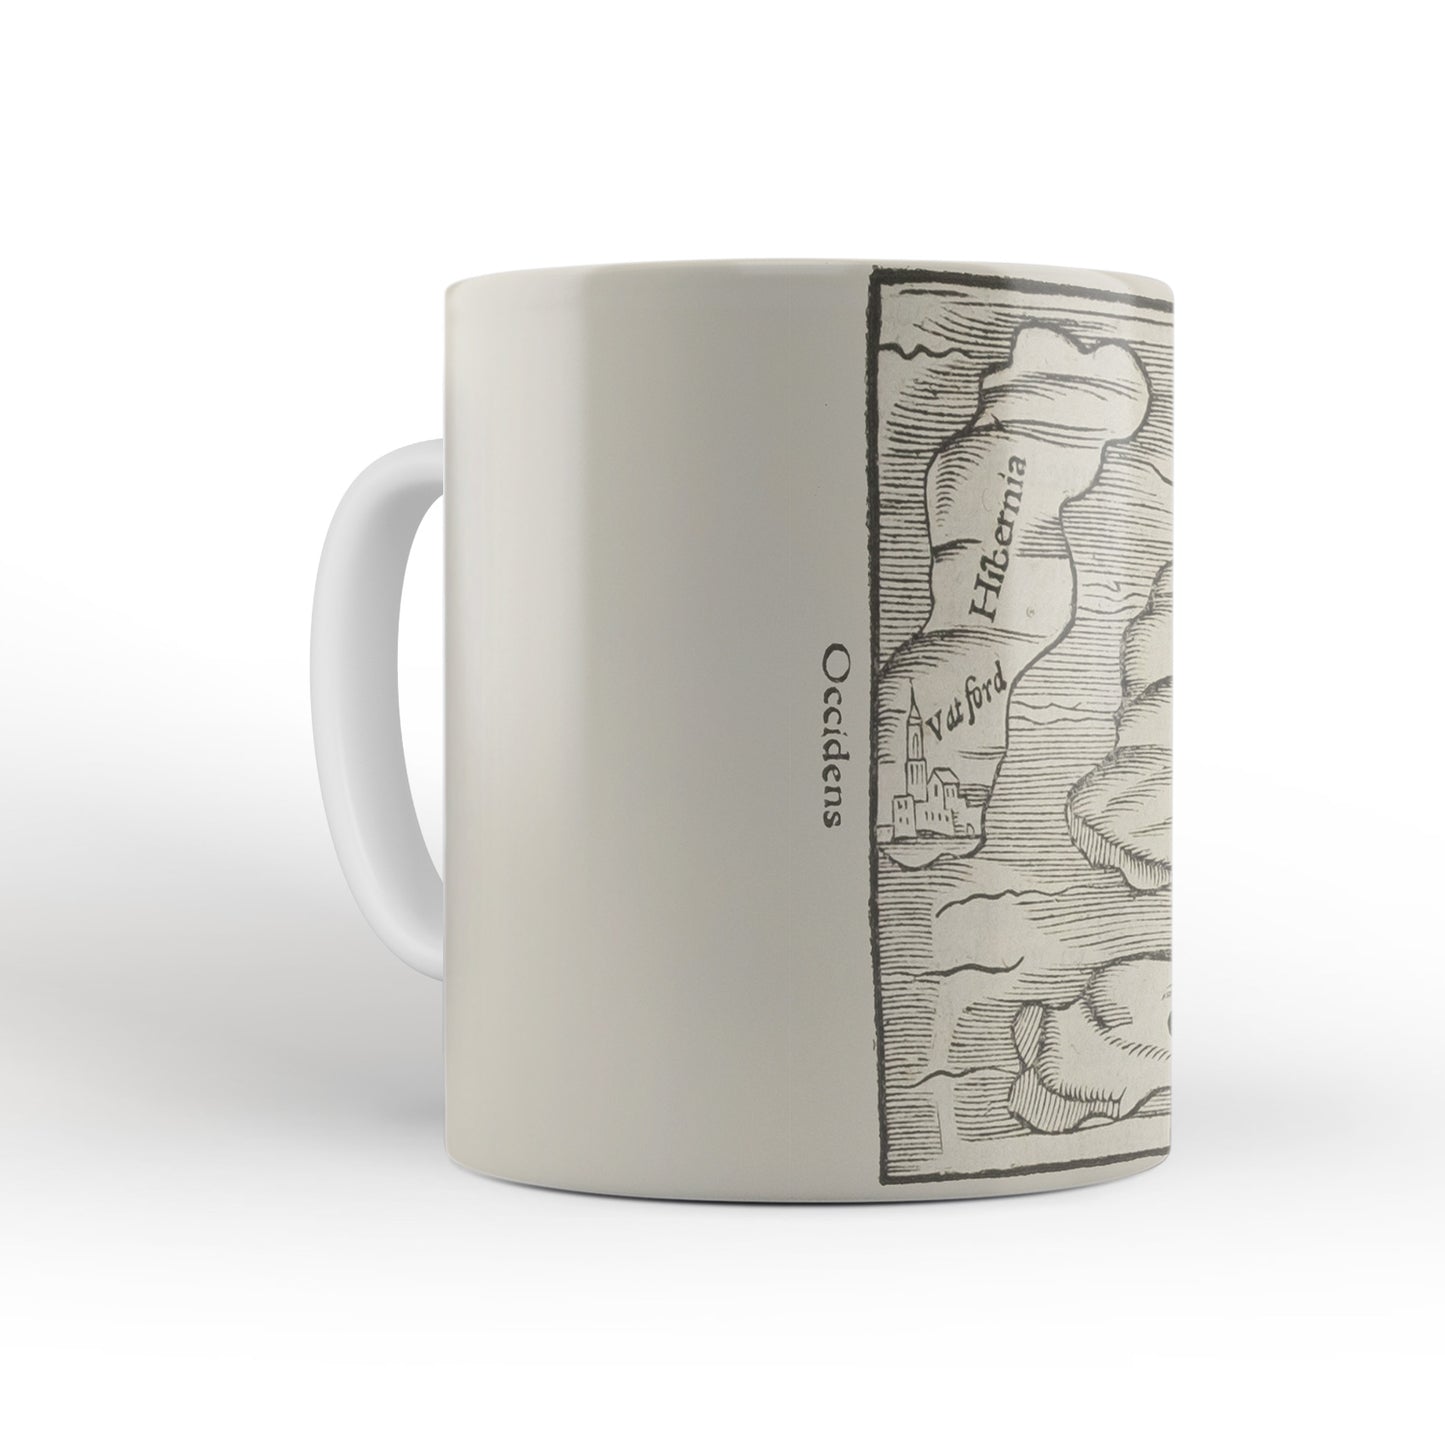 Britain Map Mug from The Cosmographia (1544) by Sebastian Münster, Leighton Library